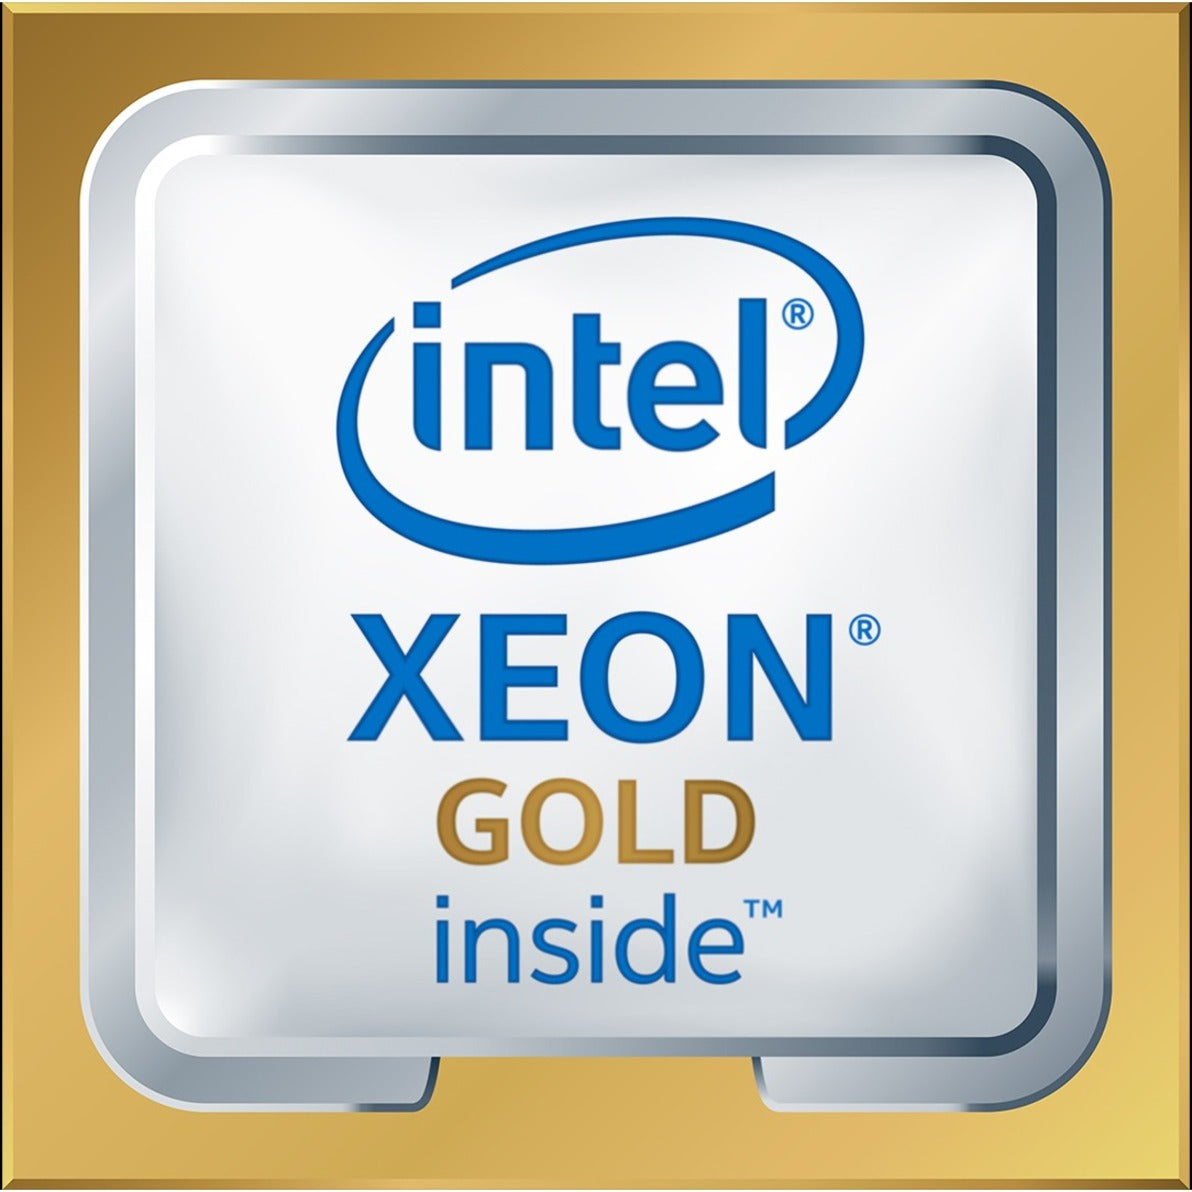 HPE P02510-B21 Xeon Gold 6242 Hexadeca-core 2.80 GHz Server Processor Upgrade, Powerful Performance for Your HPE ProLiant DL380 Gen10 Server [Discontinued]